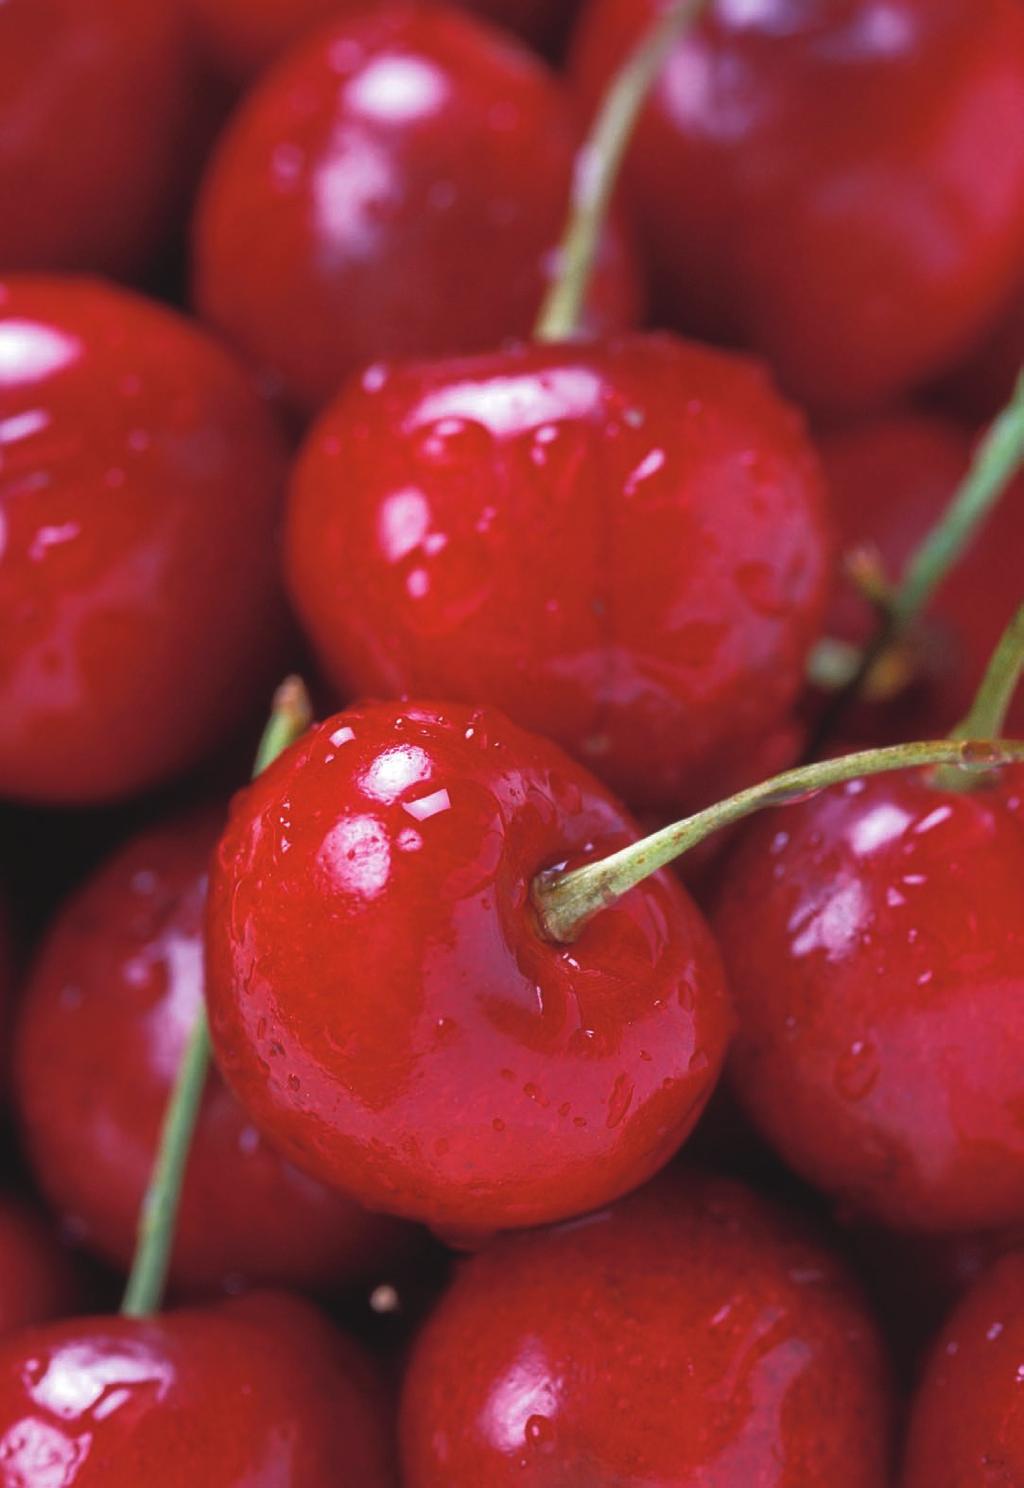 STAPLE HERE Cover Photo: Fresh Bing cherries. Taken by Peggy Greb. Public domain image by USDA Agricultural Research Service.